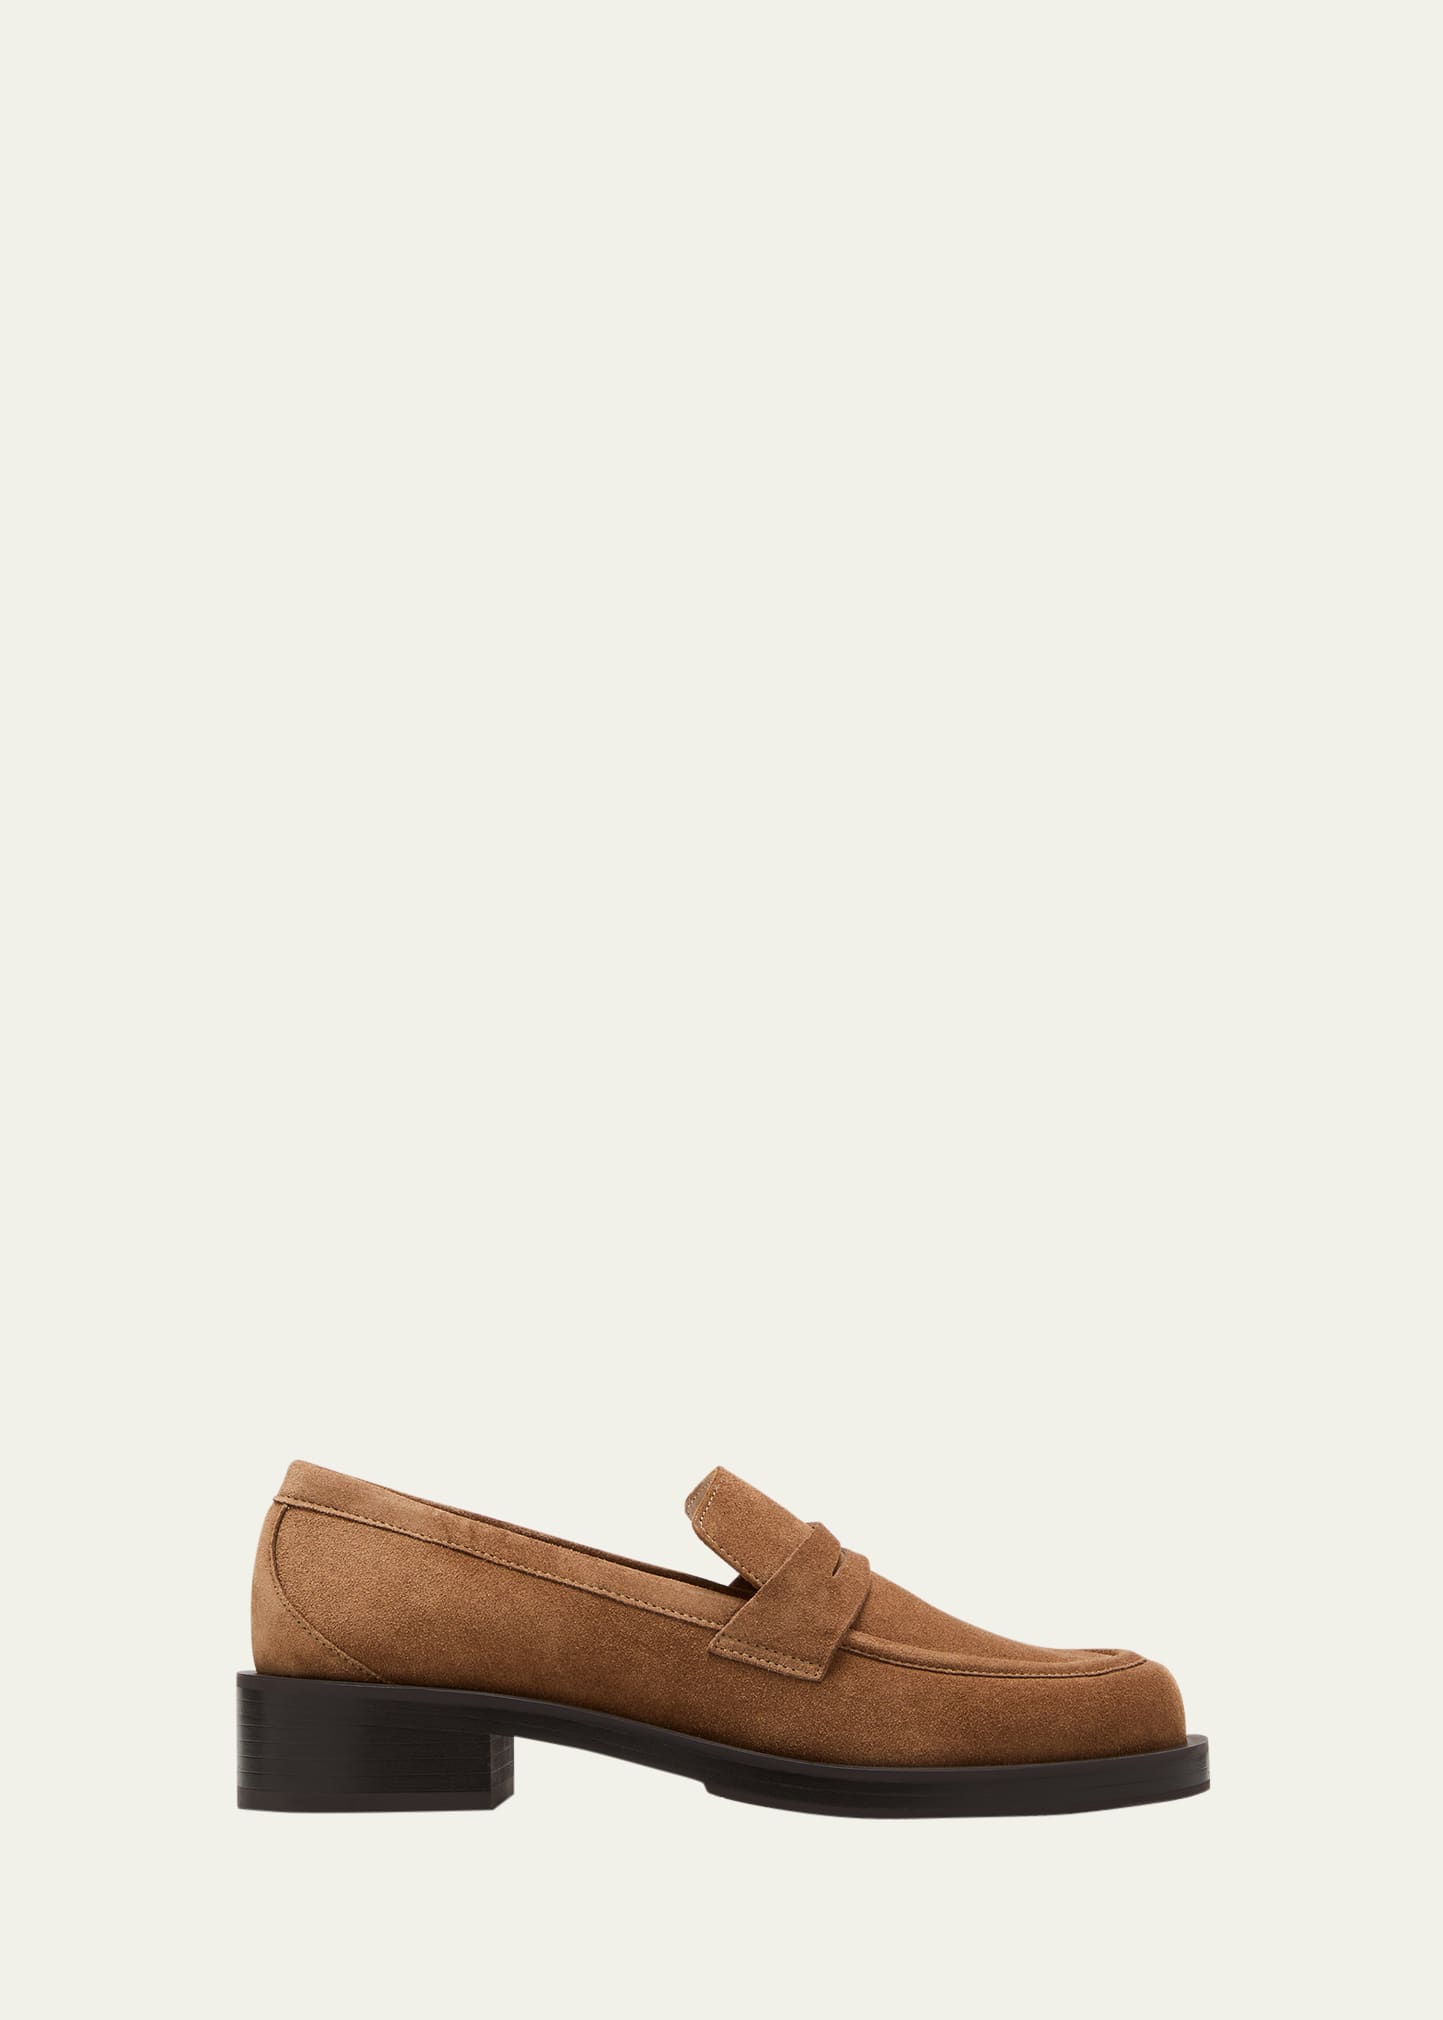 Stuart Weitzman Palmer Suede Penny Loafers In Camel